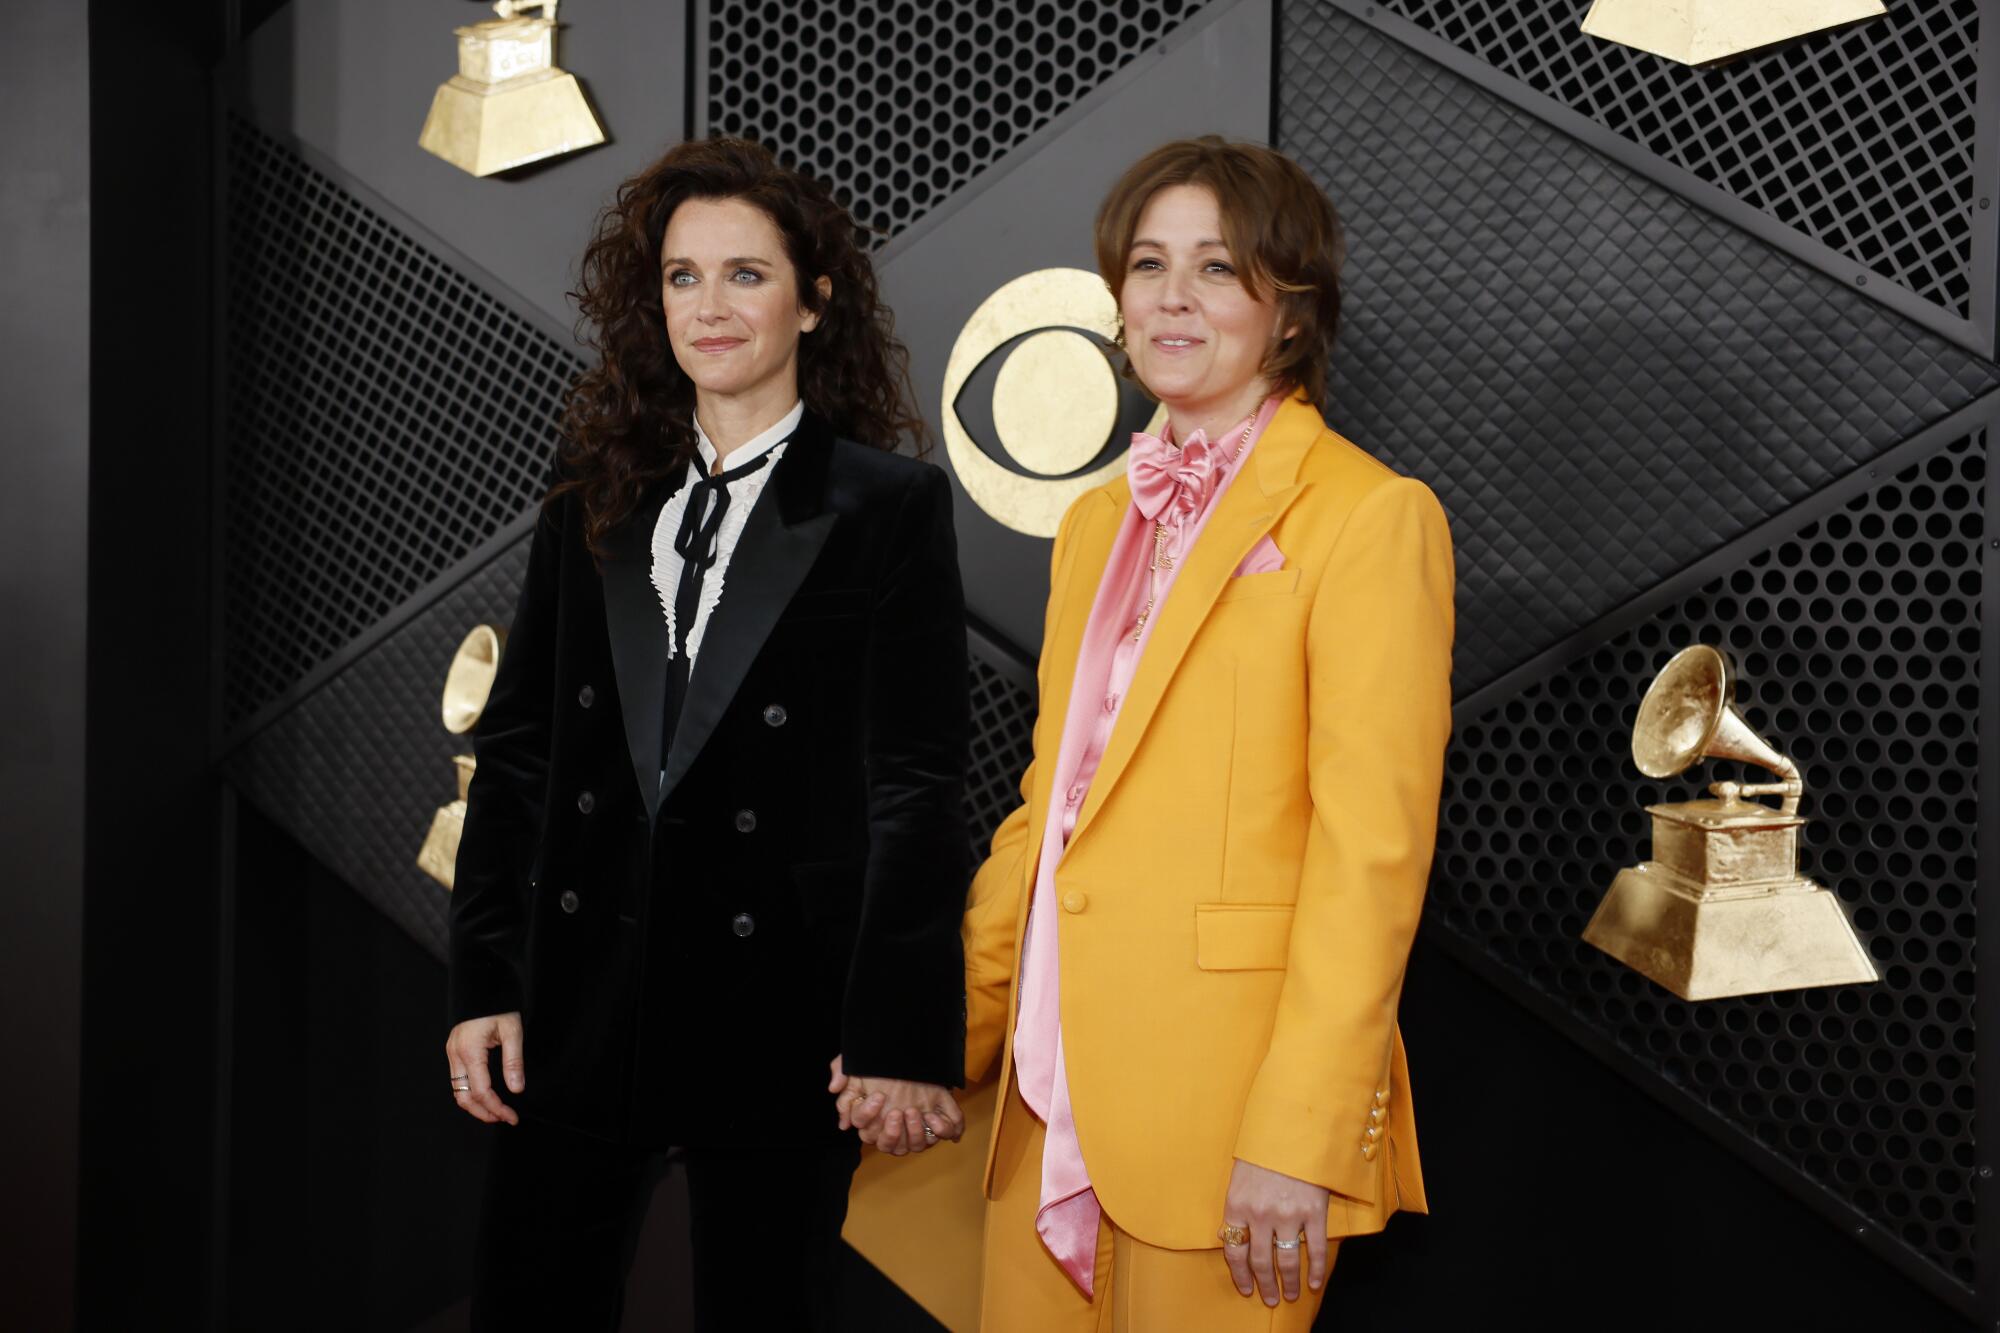 A woman in a black suite holds hands with a woman in a yellow suit